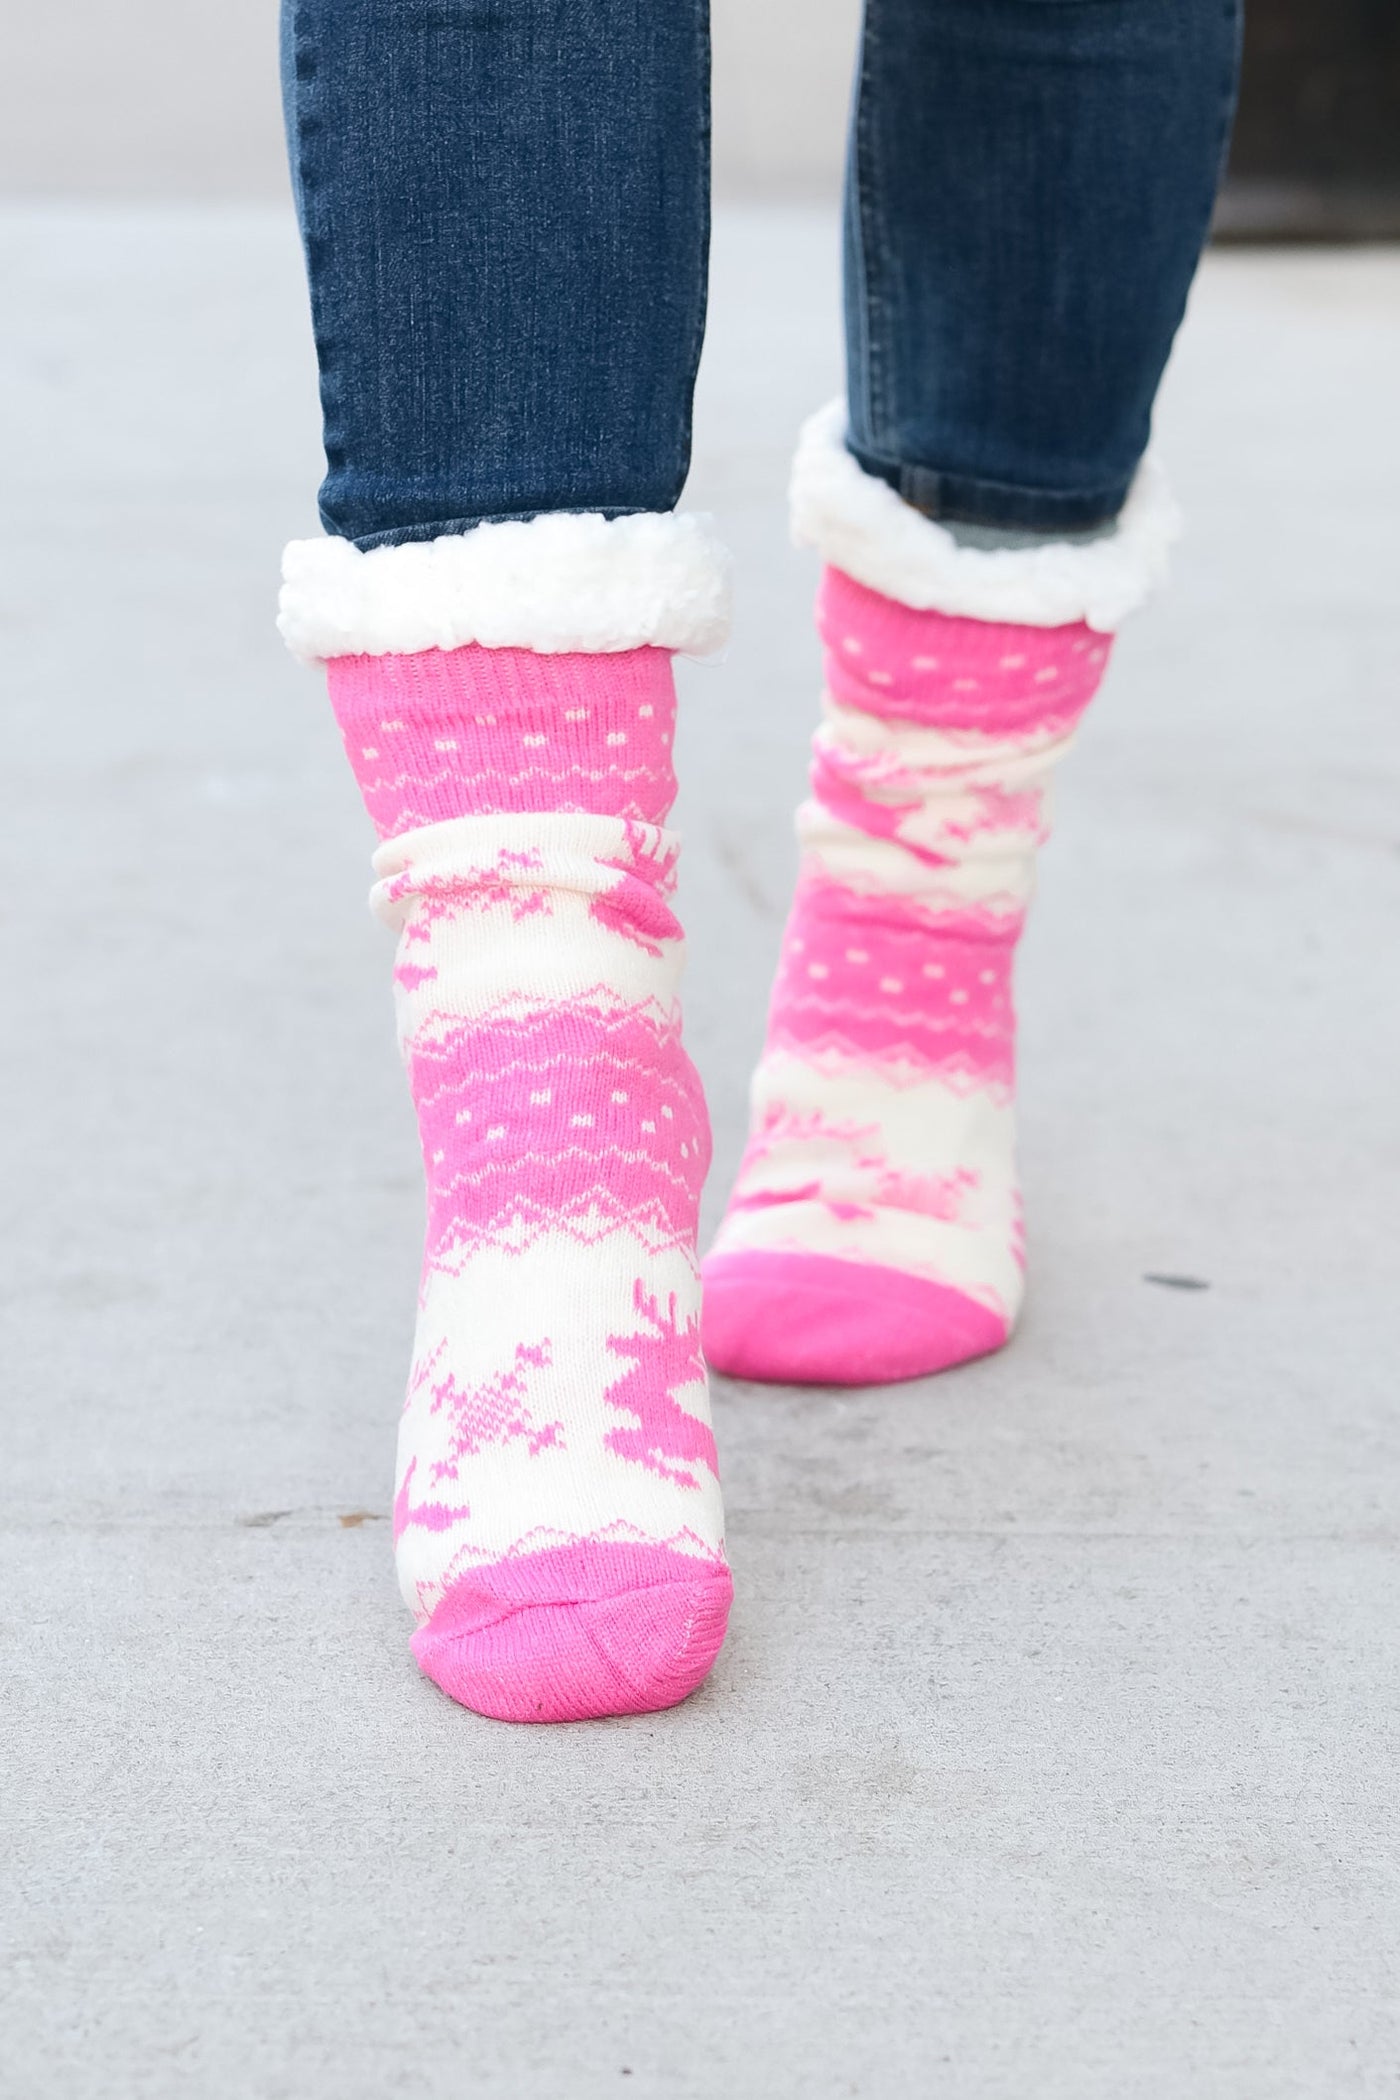 Hot Pink Reindeer Sherpa Traction Bottom Slipper Socks - Sybaritic Bags & Clothing